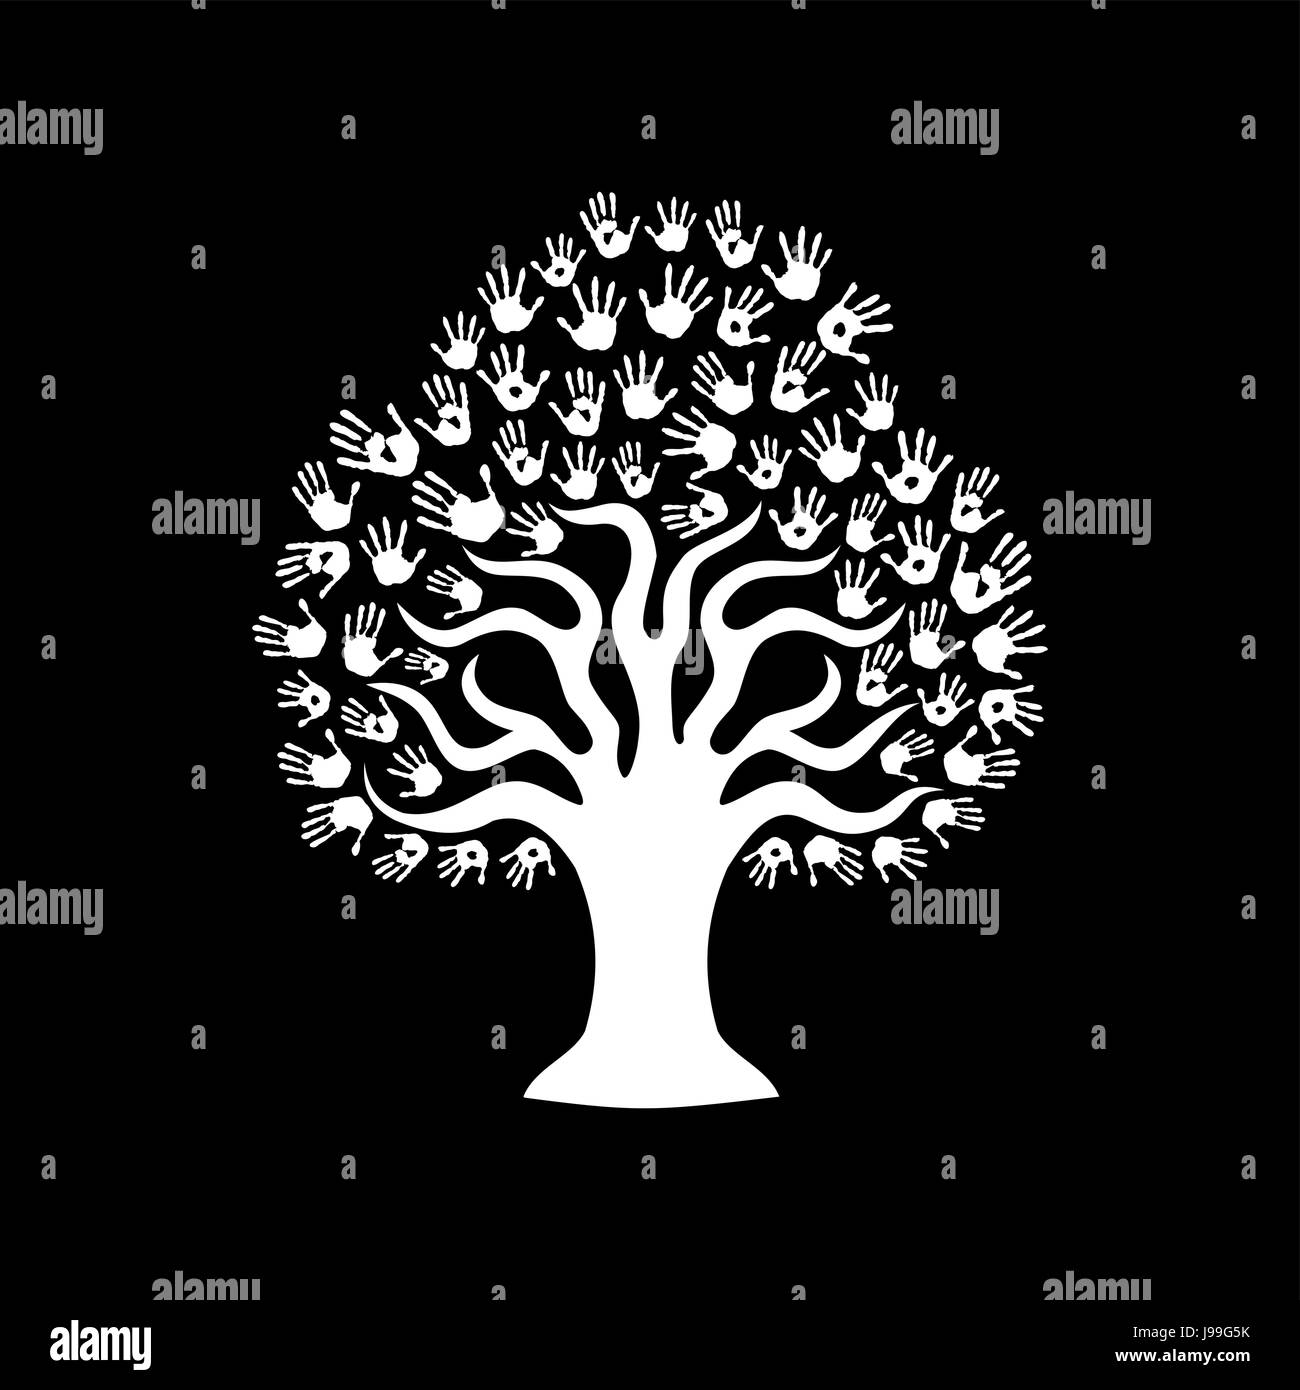 Tree hands of diverse community. Isolated black and white illustration for social help concept, charity or group work. EPS10 vector. Stock Vector